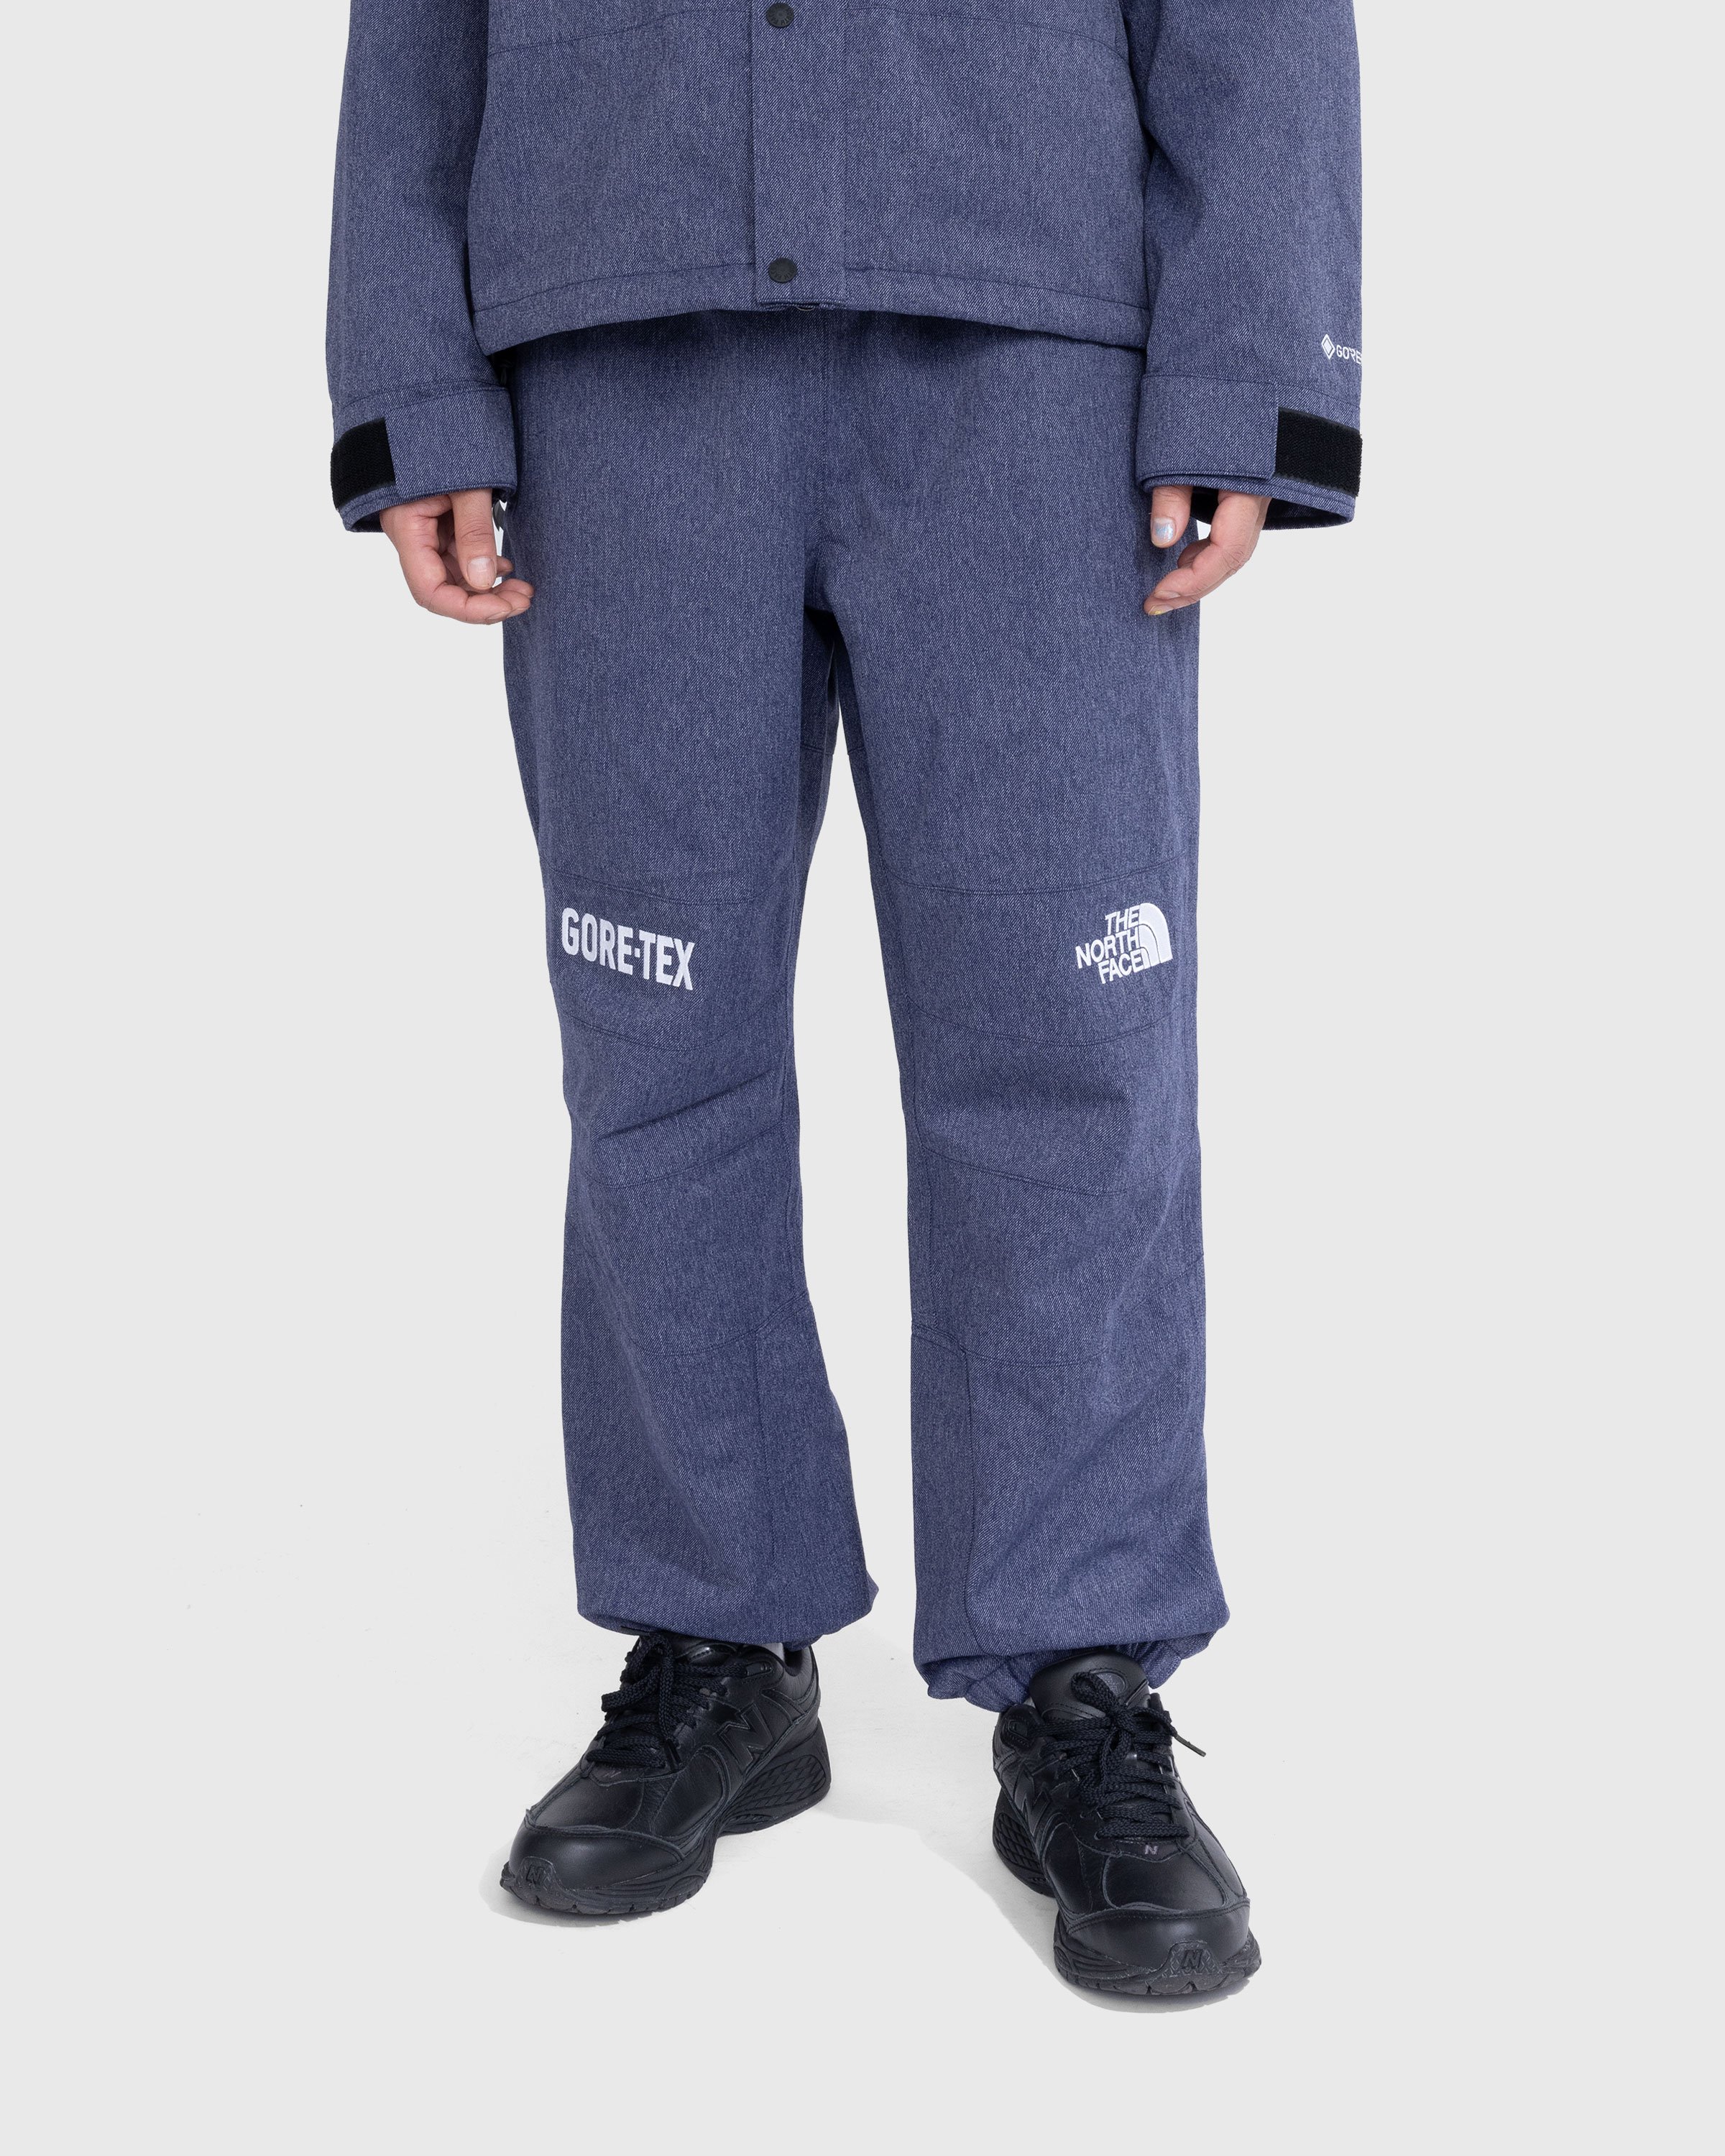 The North Face - Gore-Tex Mountain Pant Blue - Clothing - Blue - Image 4